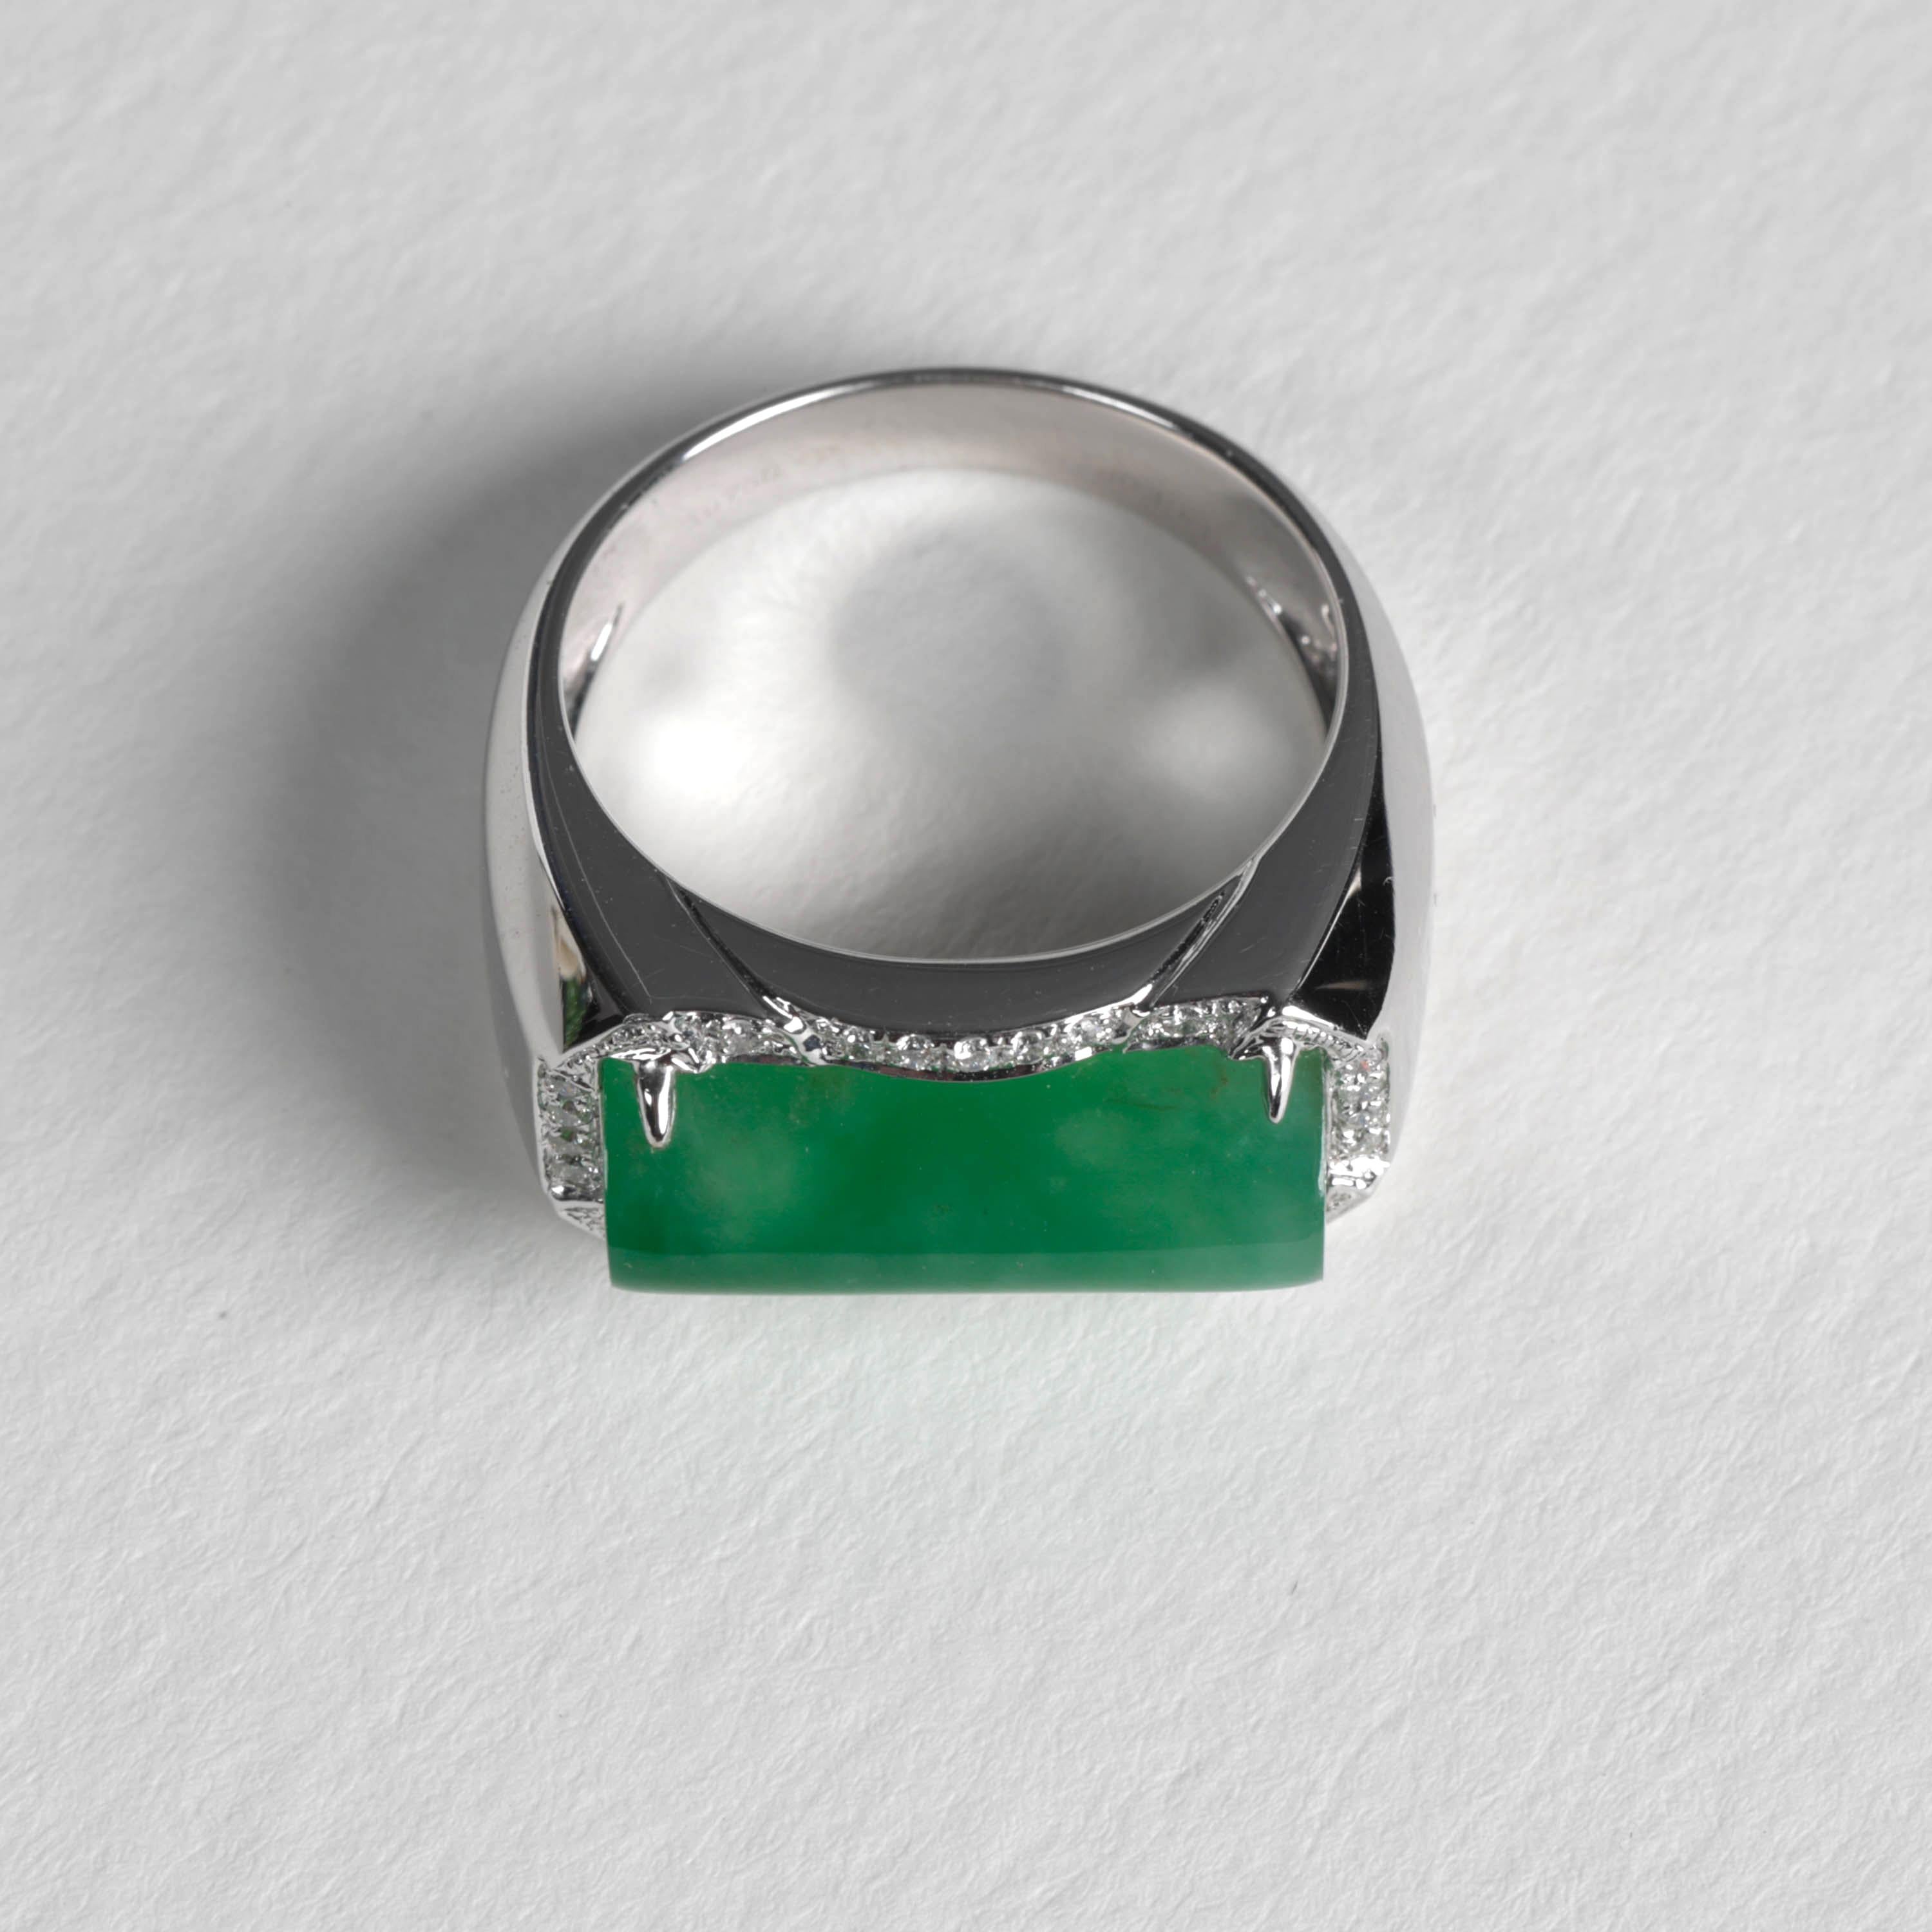 Jade Ring with Diamonds Certified Untreated, New & Unworn Size 9.5 For Sale 1